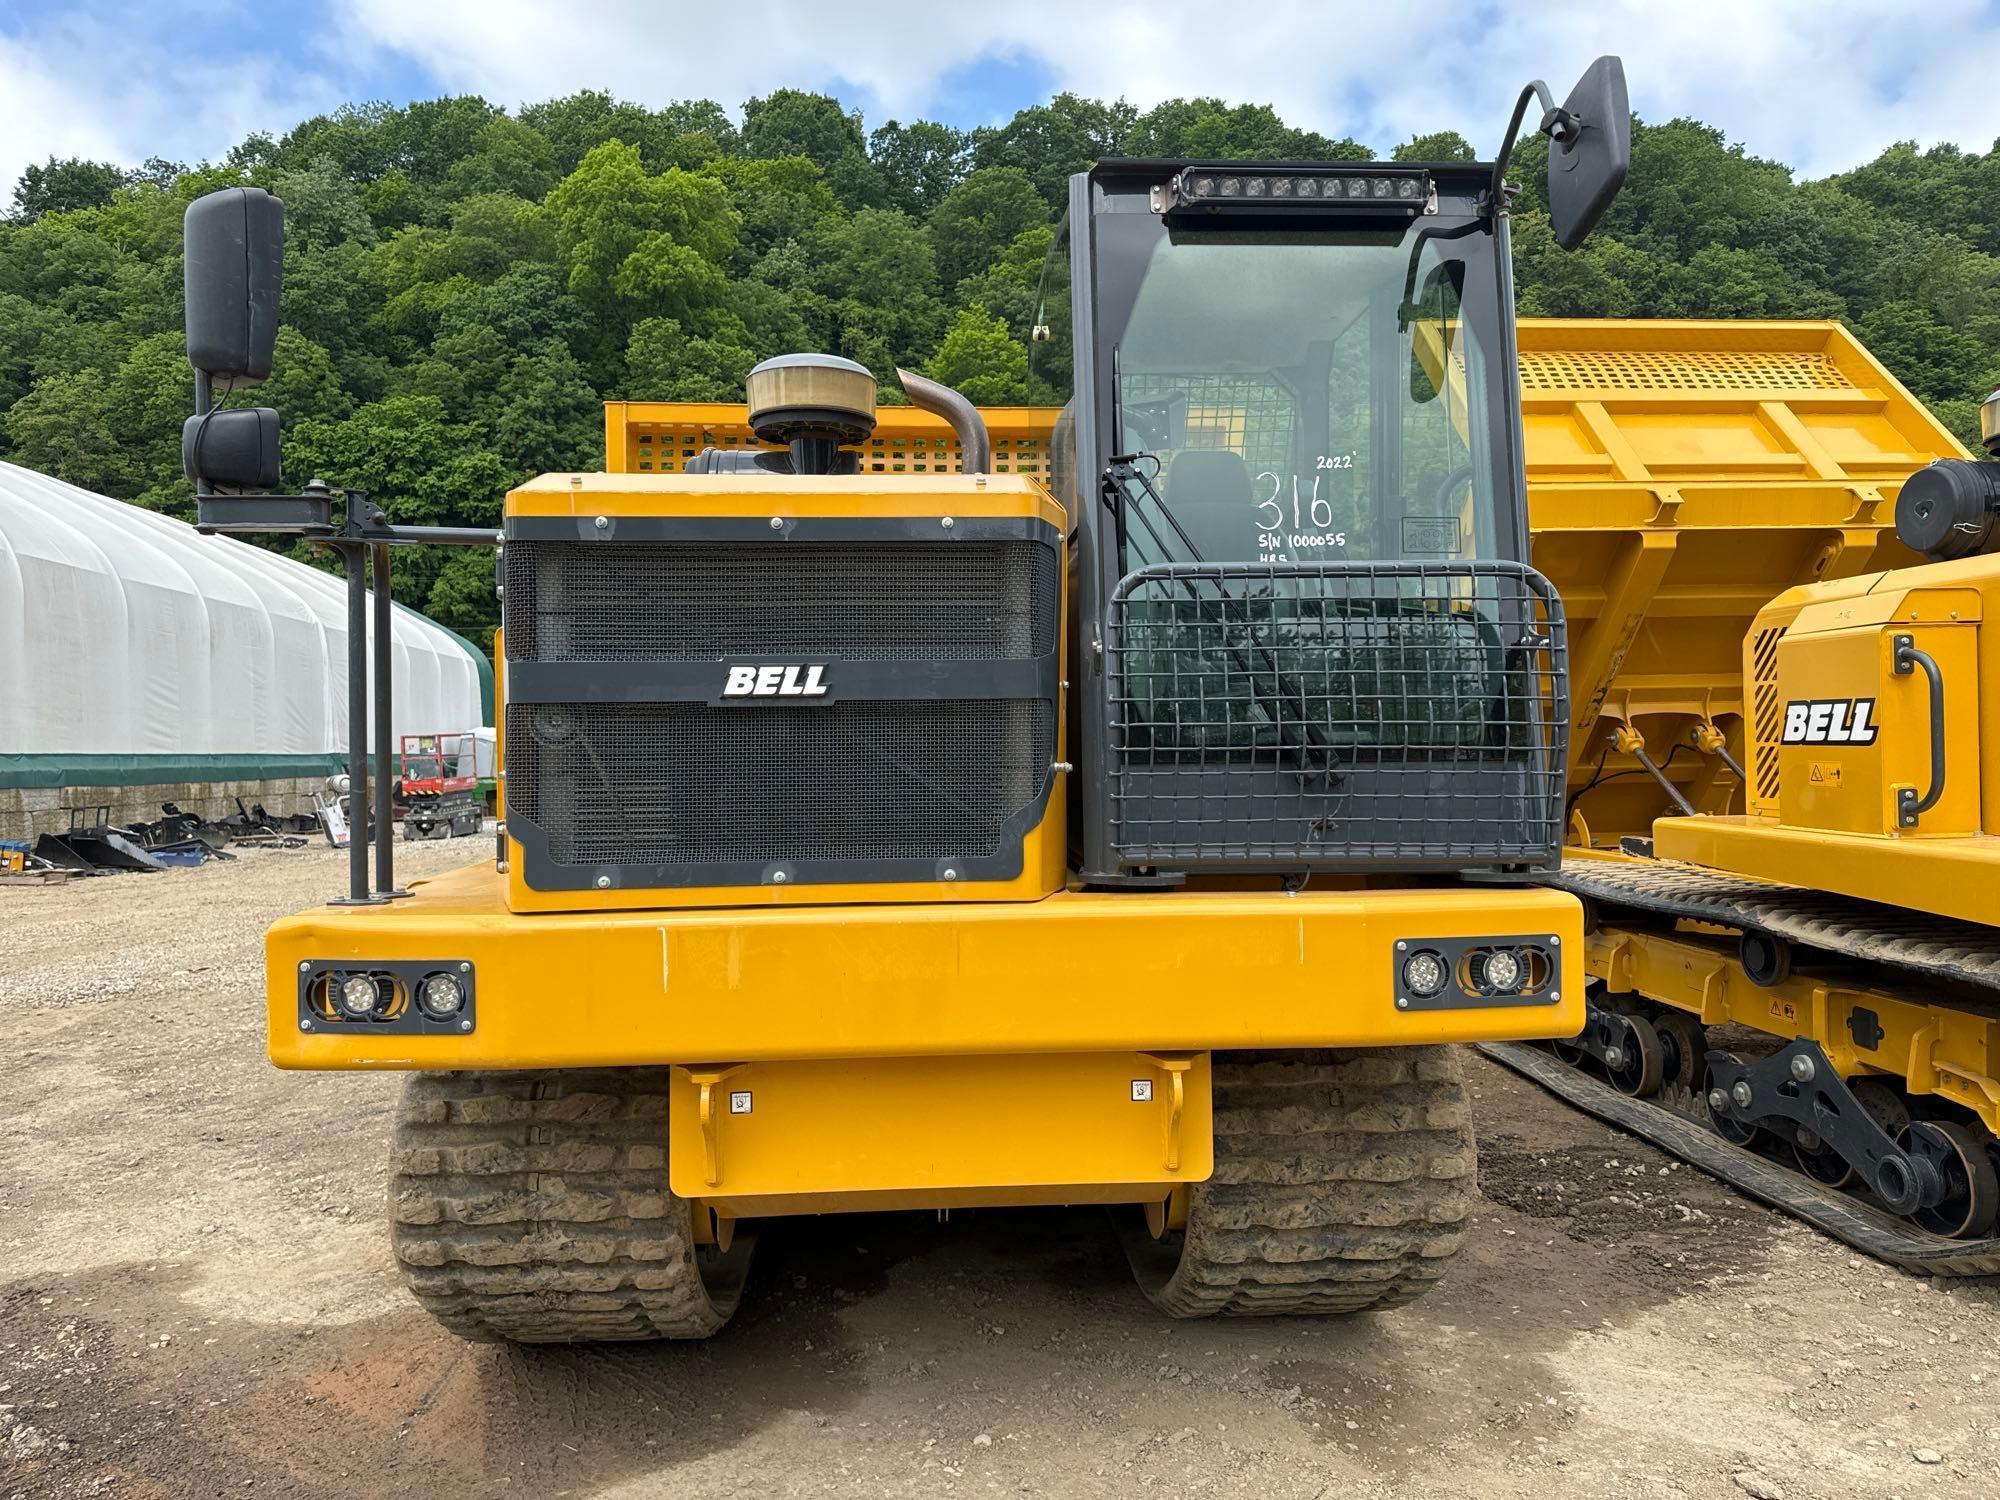 2022 BELL TC7A CRAWLER CARRIER SN 000055 powered by Cummins B6.7 diesel engine, equipped with EROPS,